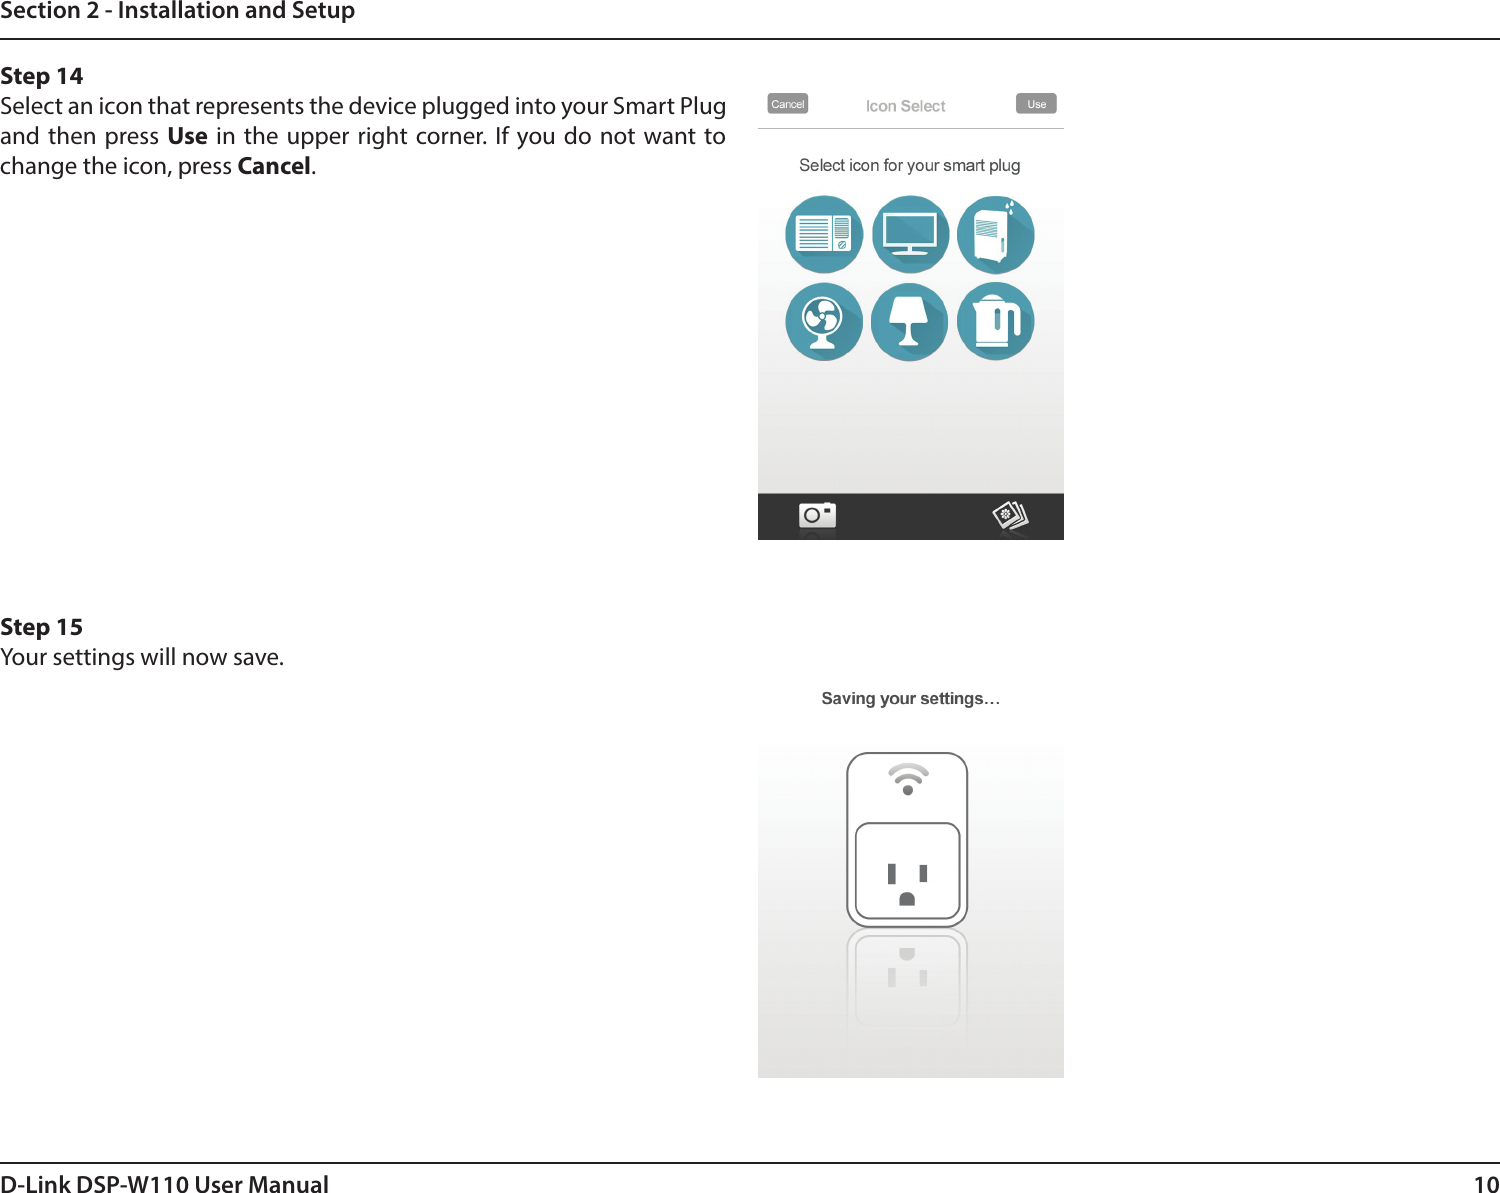 10D-Link DSP-W110 User ManualSection 2 - Installation and SetupStep 14Select an icon that represents the device plugged into your Smart Plug and then press Use in the upper right corner.  If you do not want to change the icon, press Cancel. Step 15Your settings will now save.